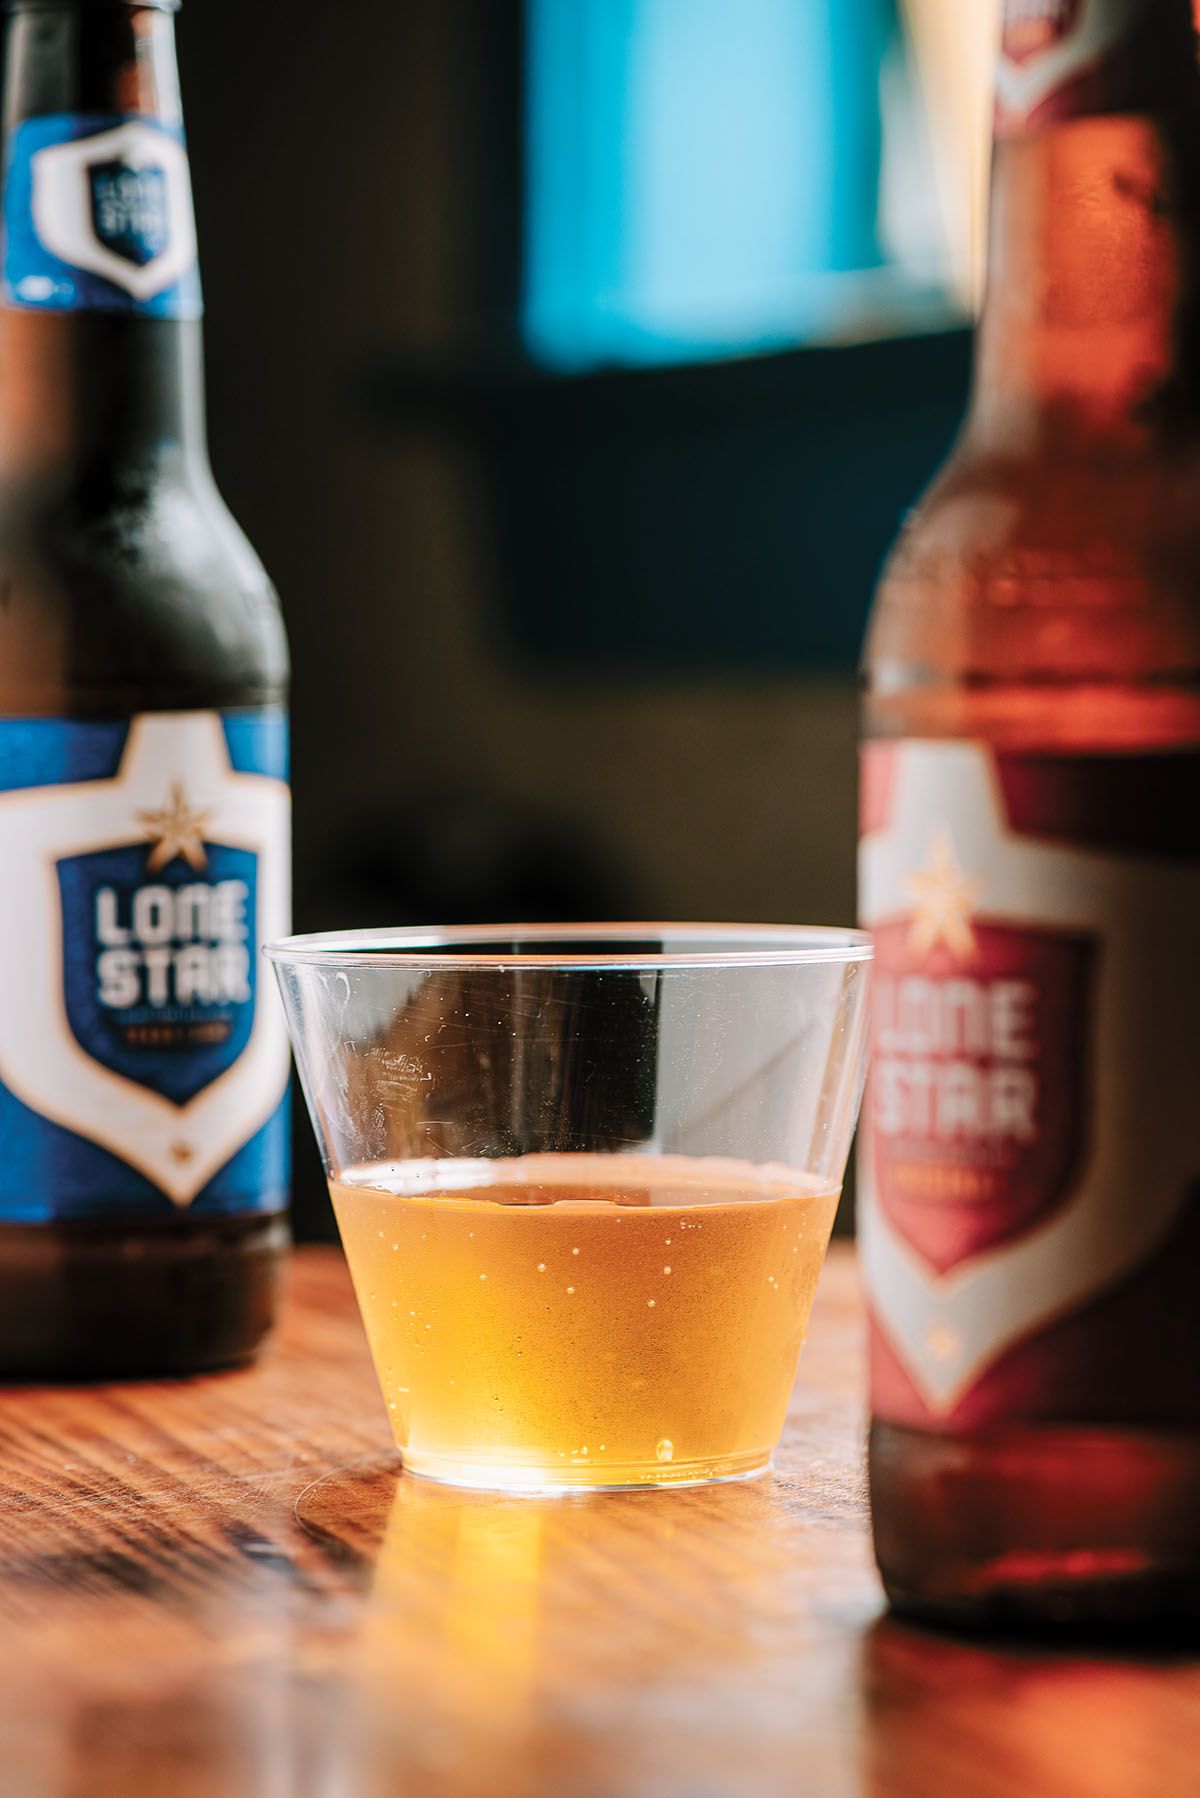 Two bottles of Lone Star beer stand next to a small cup filled with a golden brown liquid